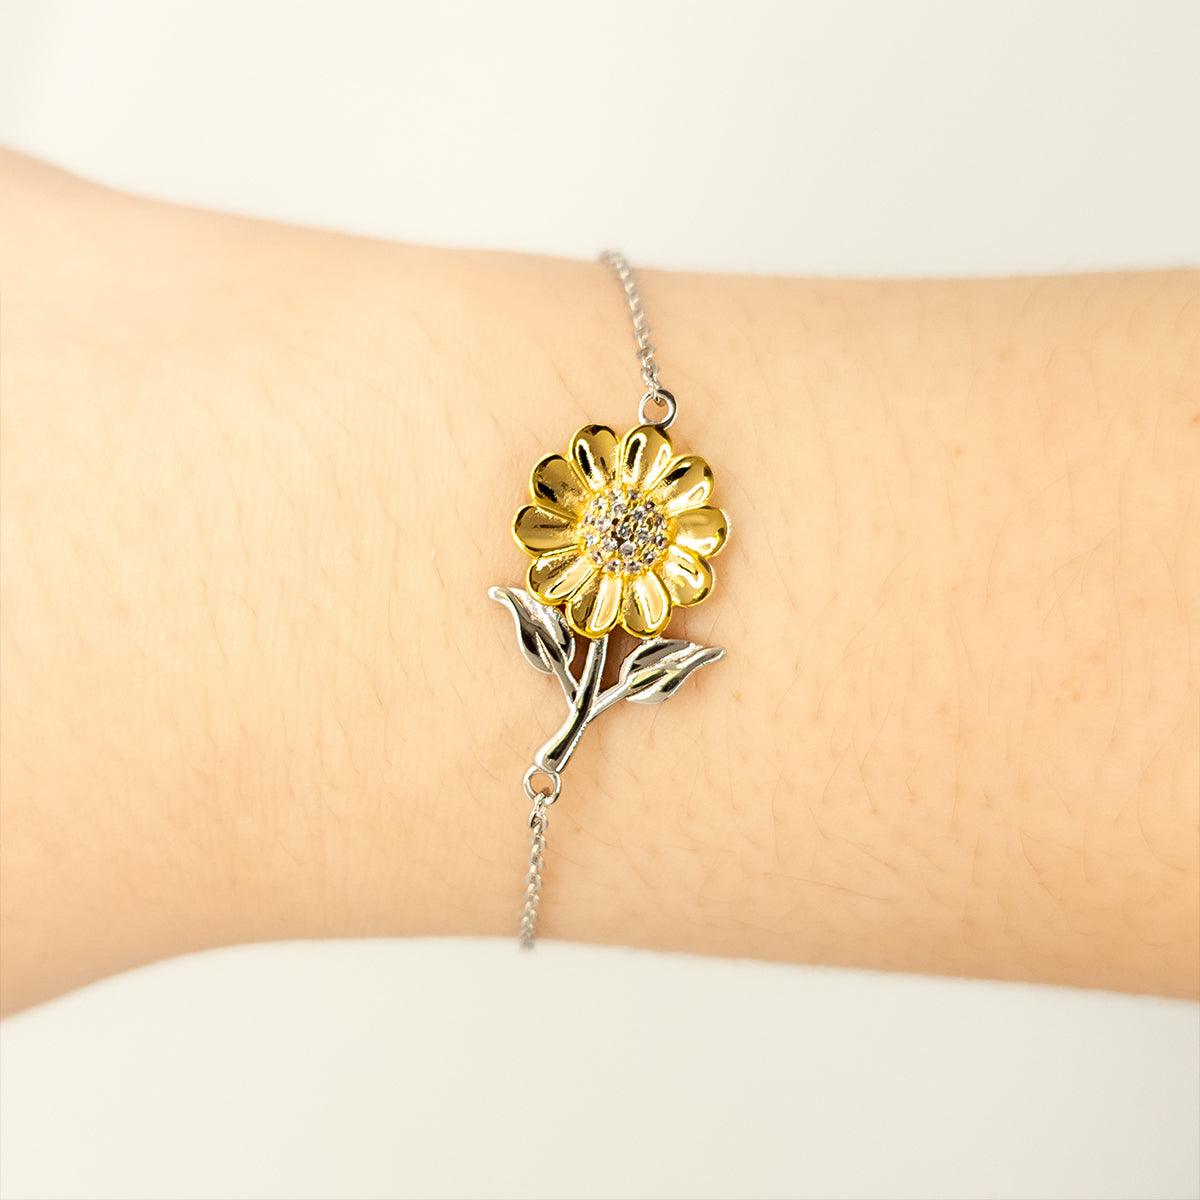 Michigan is my home Gifts, Lovely Michigan Birthday Christmas Sunflower Bracelet For People from Michigan, Men, Women, Friends - Mallard Moon Gift Shop